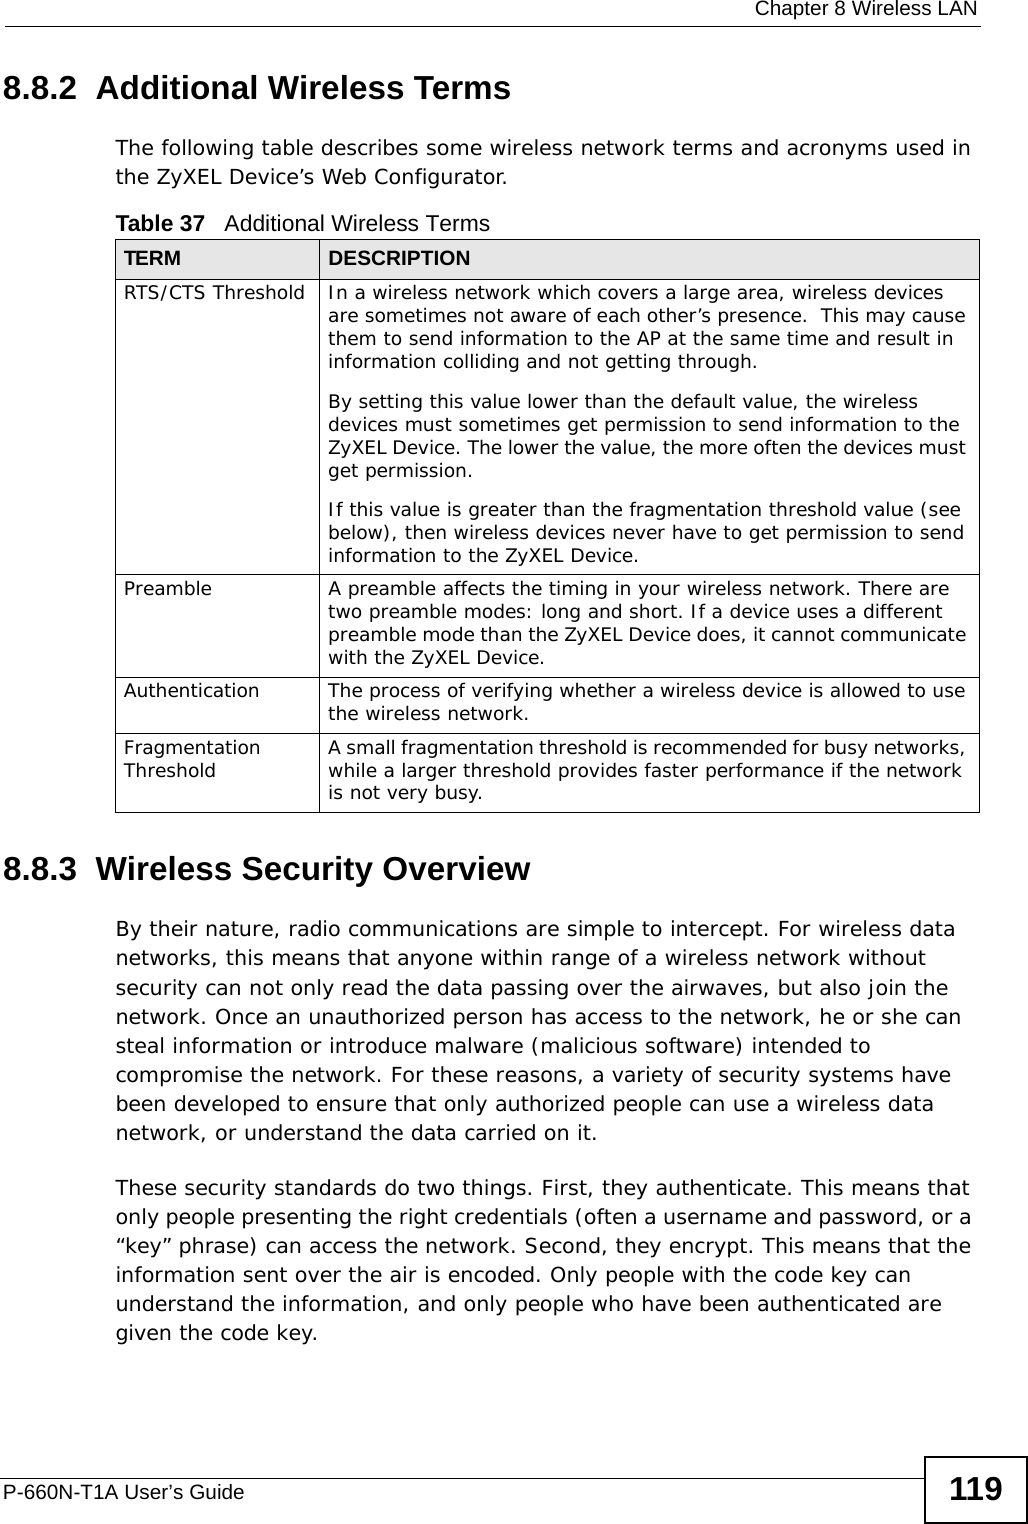  Chapter 8 Wireless LANP-660N-T1A User’s Guide 1198.8.2  Additional Wireless TermsThe following table describes some wireless network terms and acronyms used in the ZyXEL Device’s Web Configurator.8.8.3  Wireless Security OverviewBy their nature, radio communications are simple to intercept. For wireless data networks, this means that anyone within range of a wireless network without security can not only read the data passing over the airwaves, but also join the network. Once an unauthorized person has access to the network, he or she can steal information or introduce malware (malicious software) intended to compromise the network. For these reasons, a variety of security systems have been developed to ensure that only authorized people can use a wireless data network, or understand the data carried on it.These security standards do two things. First, they authenticate. This means that only people presenting the right credentials (often a username and password, or a “key” phrase) can access the network. Second, they encrypt. This means that the information sent over the air is encoded. Only people with the code key can understand the information, and only people who have been authenticated are given the code key.Table 37   Additional Wireless TermsTERM DESCRIPTIONRTS/CTS Threshold In a wireless network which covers a large area, wireless devices are sometimes not aware of each other’s presence.  This may cause them to send information to the AP at the same time and result in information colliding and not getting through.By setting this value lower than the default value, the wireless devices must sometimes get permission to send information to the ZyXEL Device. The lower the value, the more often the devices must get permission.If this value is greater than the fragmentation threshold value (see below), then wireless devices never have to get permission to send information to the ZyXEL Device.Preamble A preamble affects the timing in your wireless network. There are two preamble modes: long and short. If a device uses a different preamble mode than the ZyXEL Device does, it cannot communicate with the ZyXEL Device.Authentication The process of verifying whether a wireless device is allowed to use the wireless network.Fragmentation Threshold A small fragmentation threshold is recommended for busy networks, while a larger threshold provides faster performance if the network is not very busy.